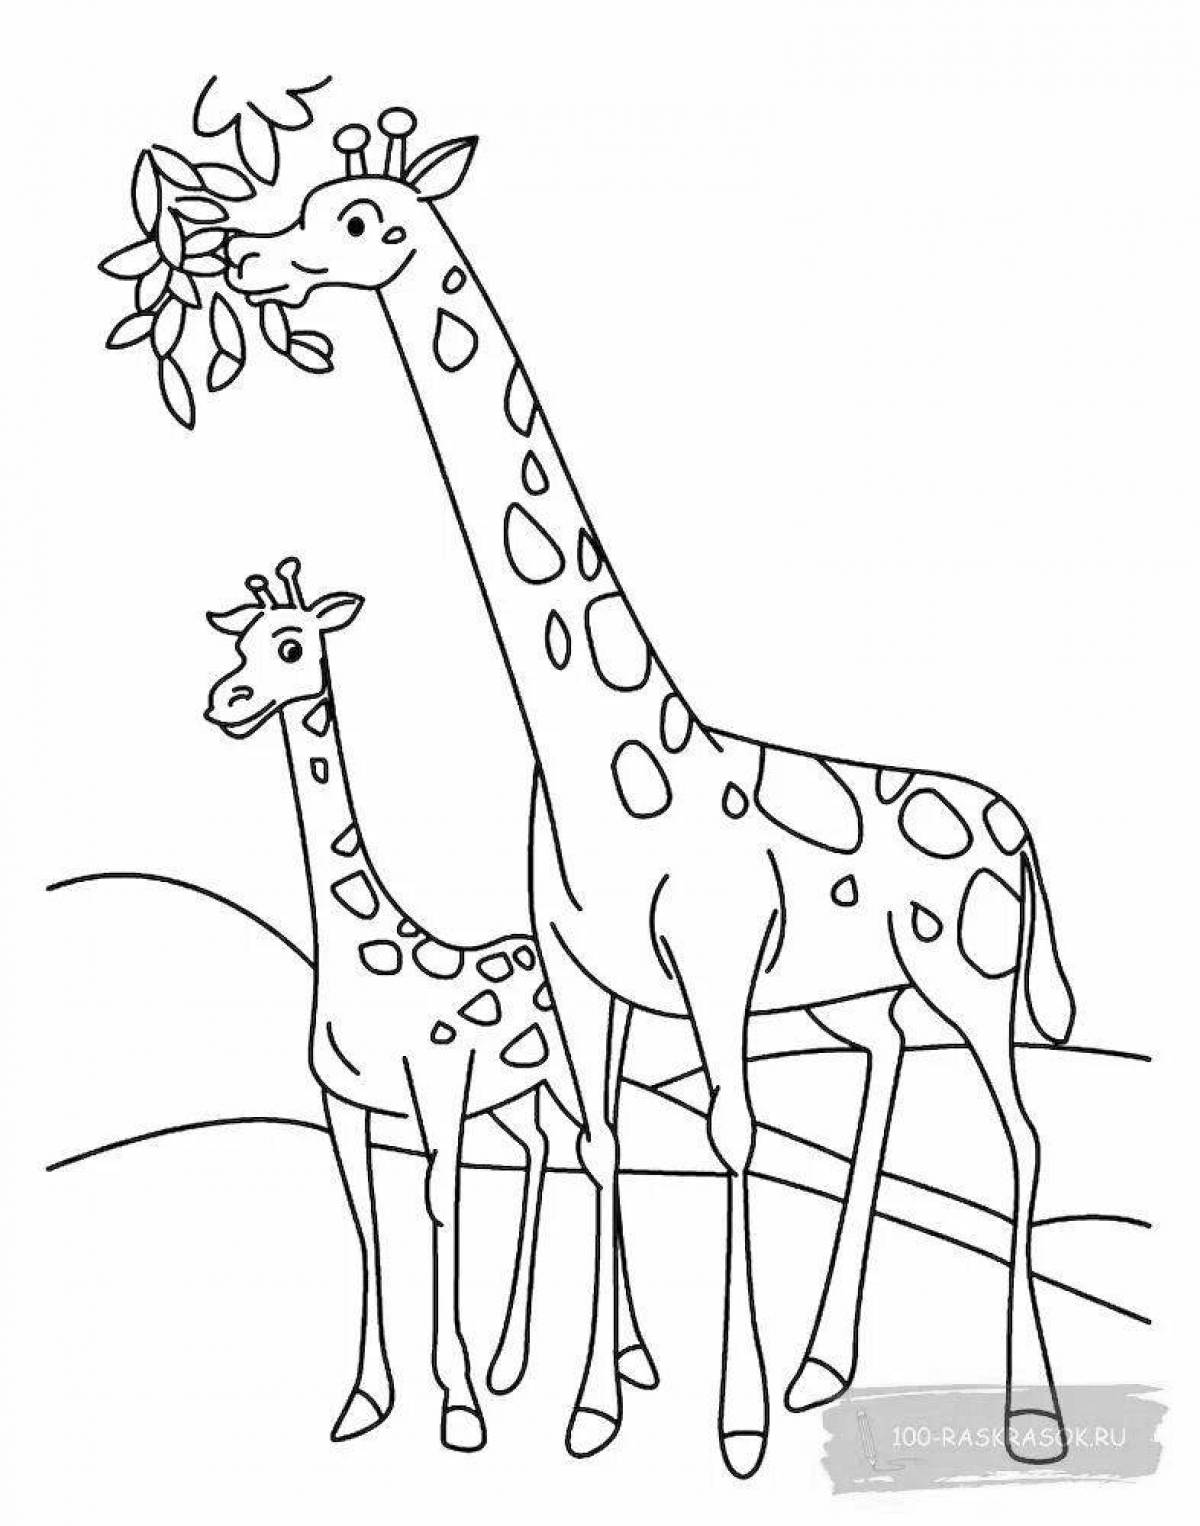 Coloring page funny giraffe